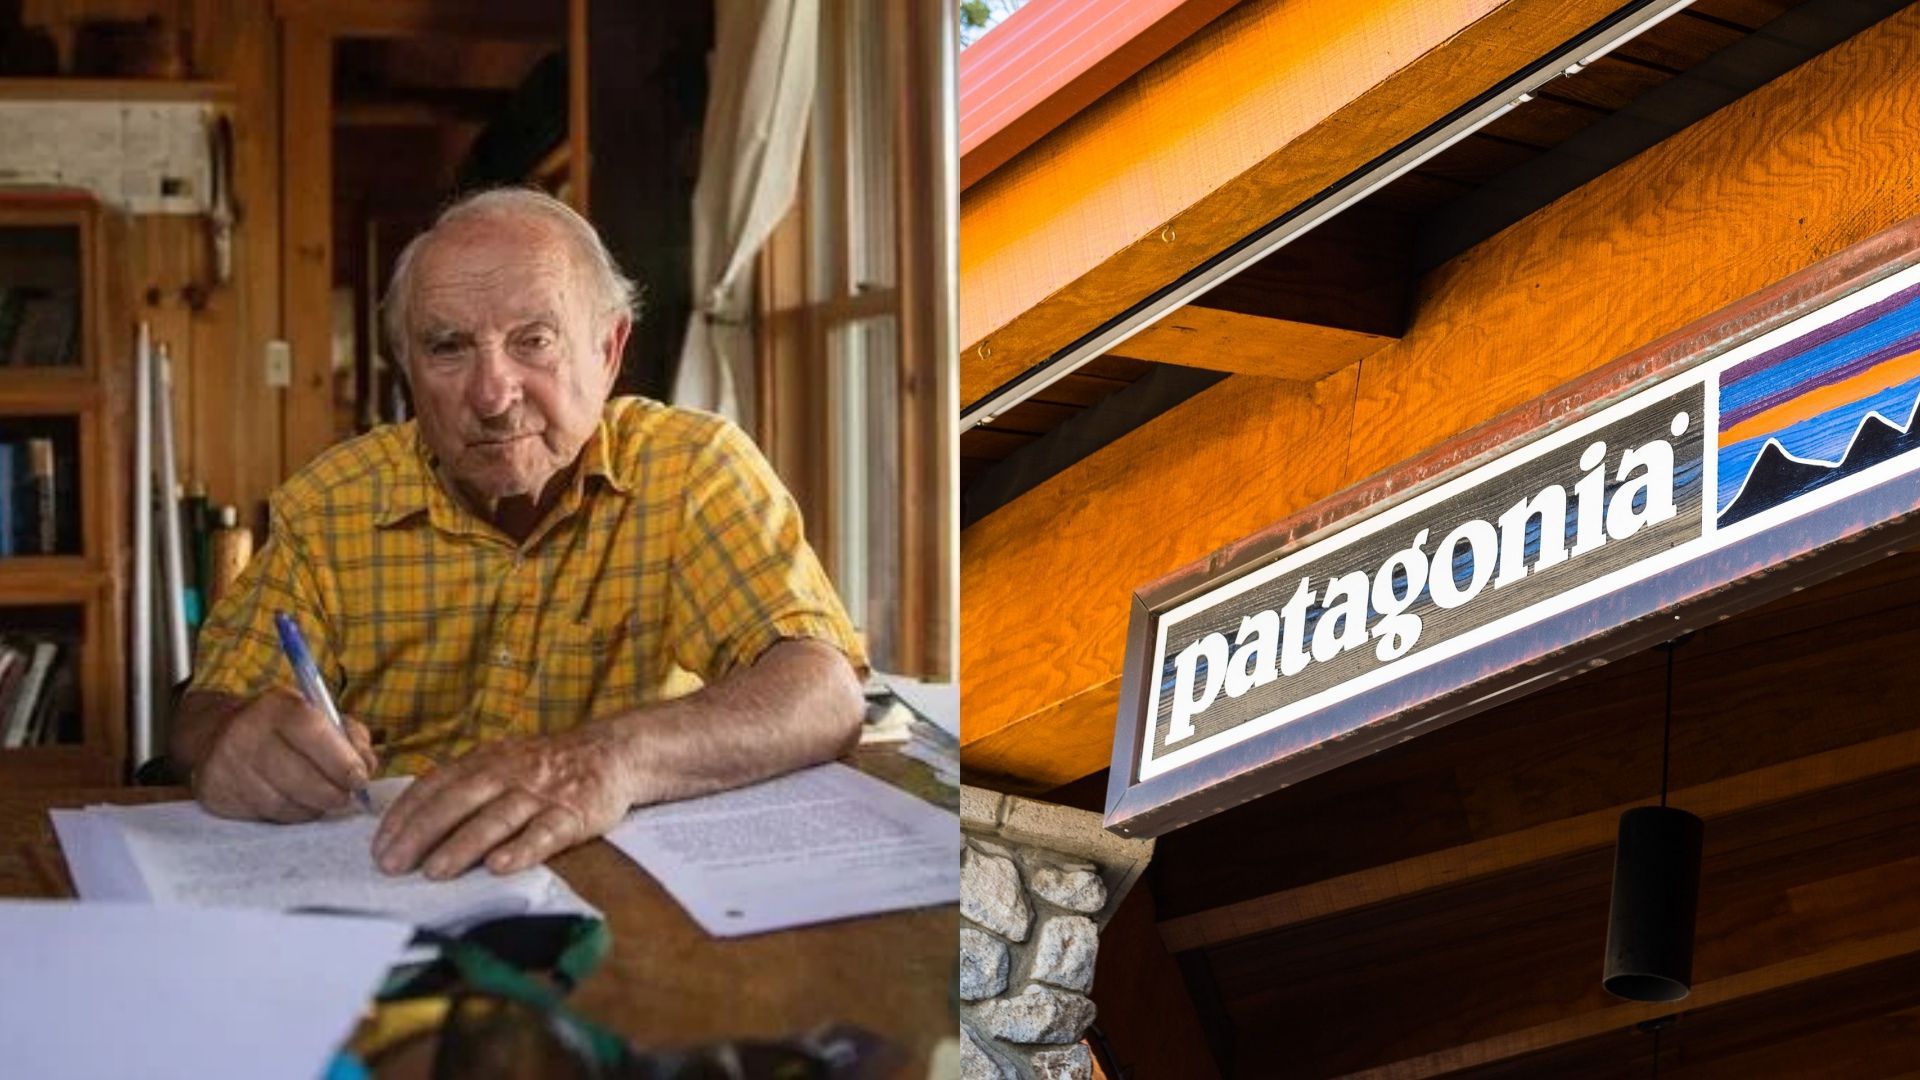 Owner Of Patagonia Faces Backlash After Giving $3 Billion Company